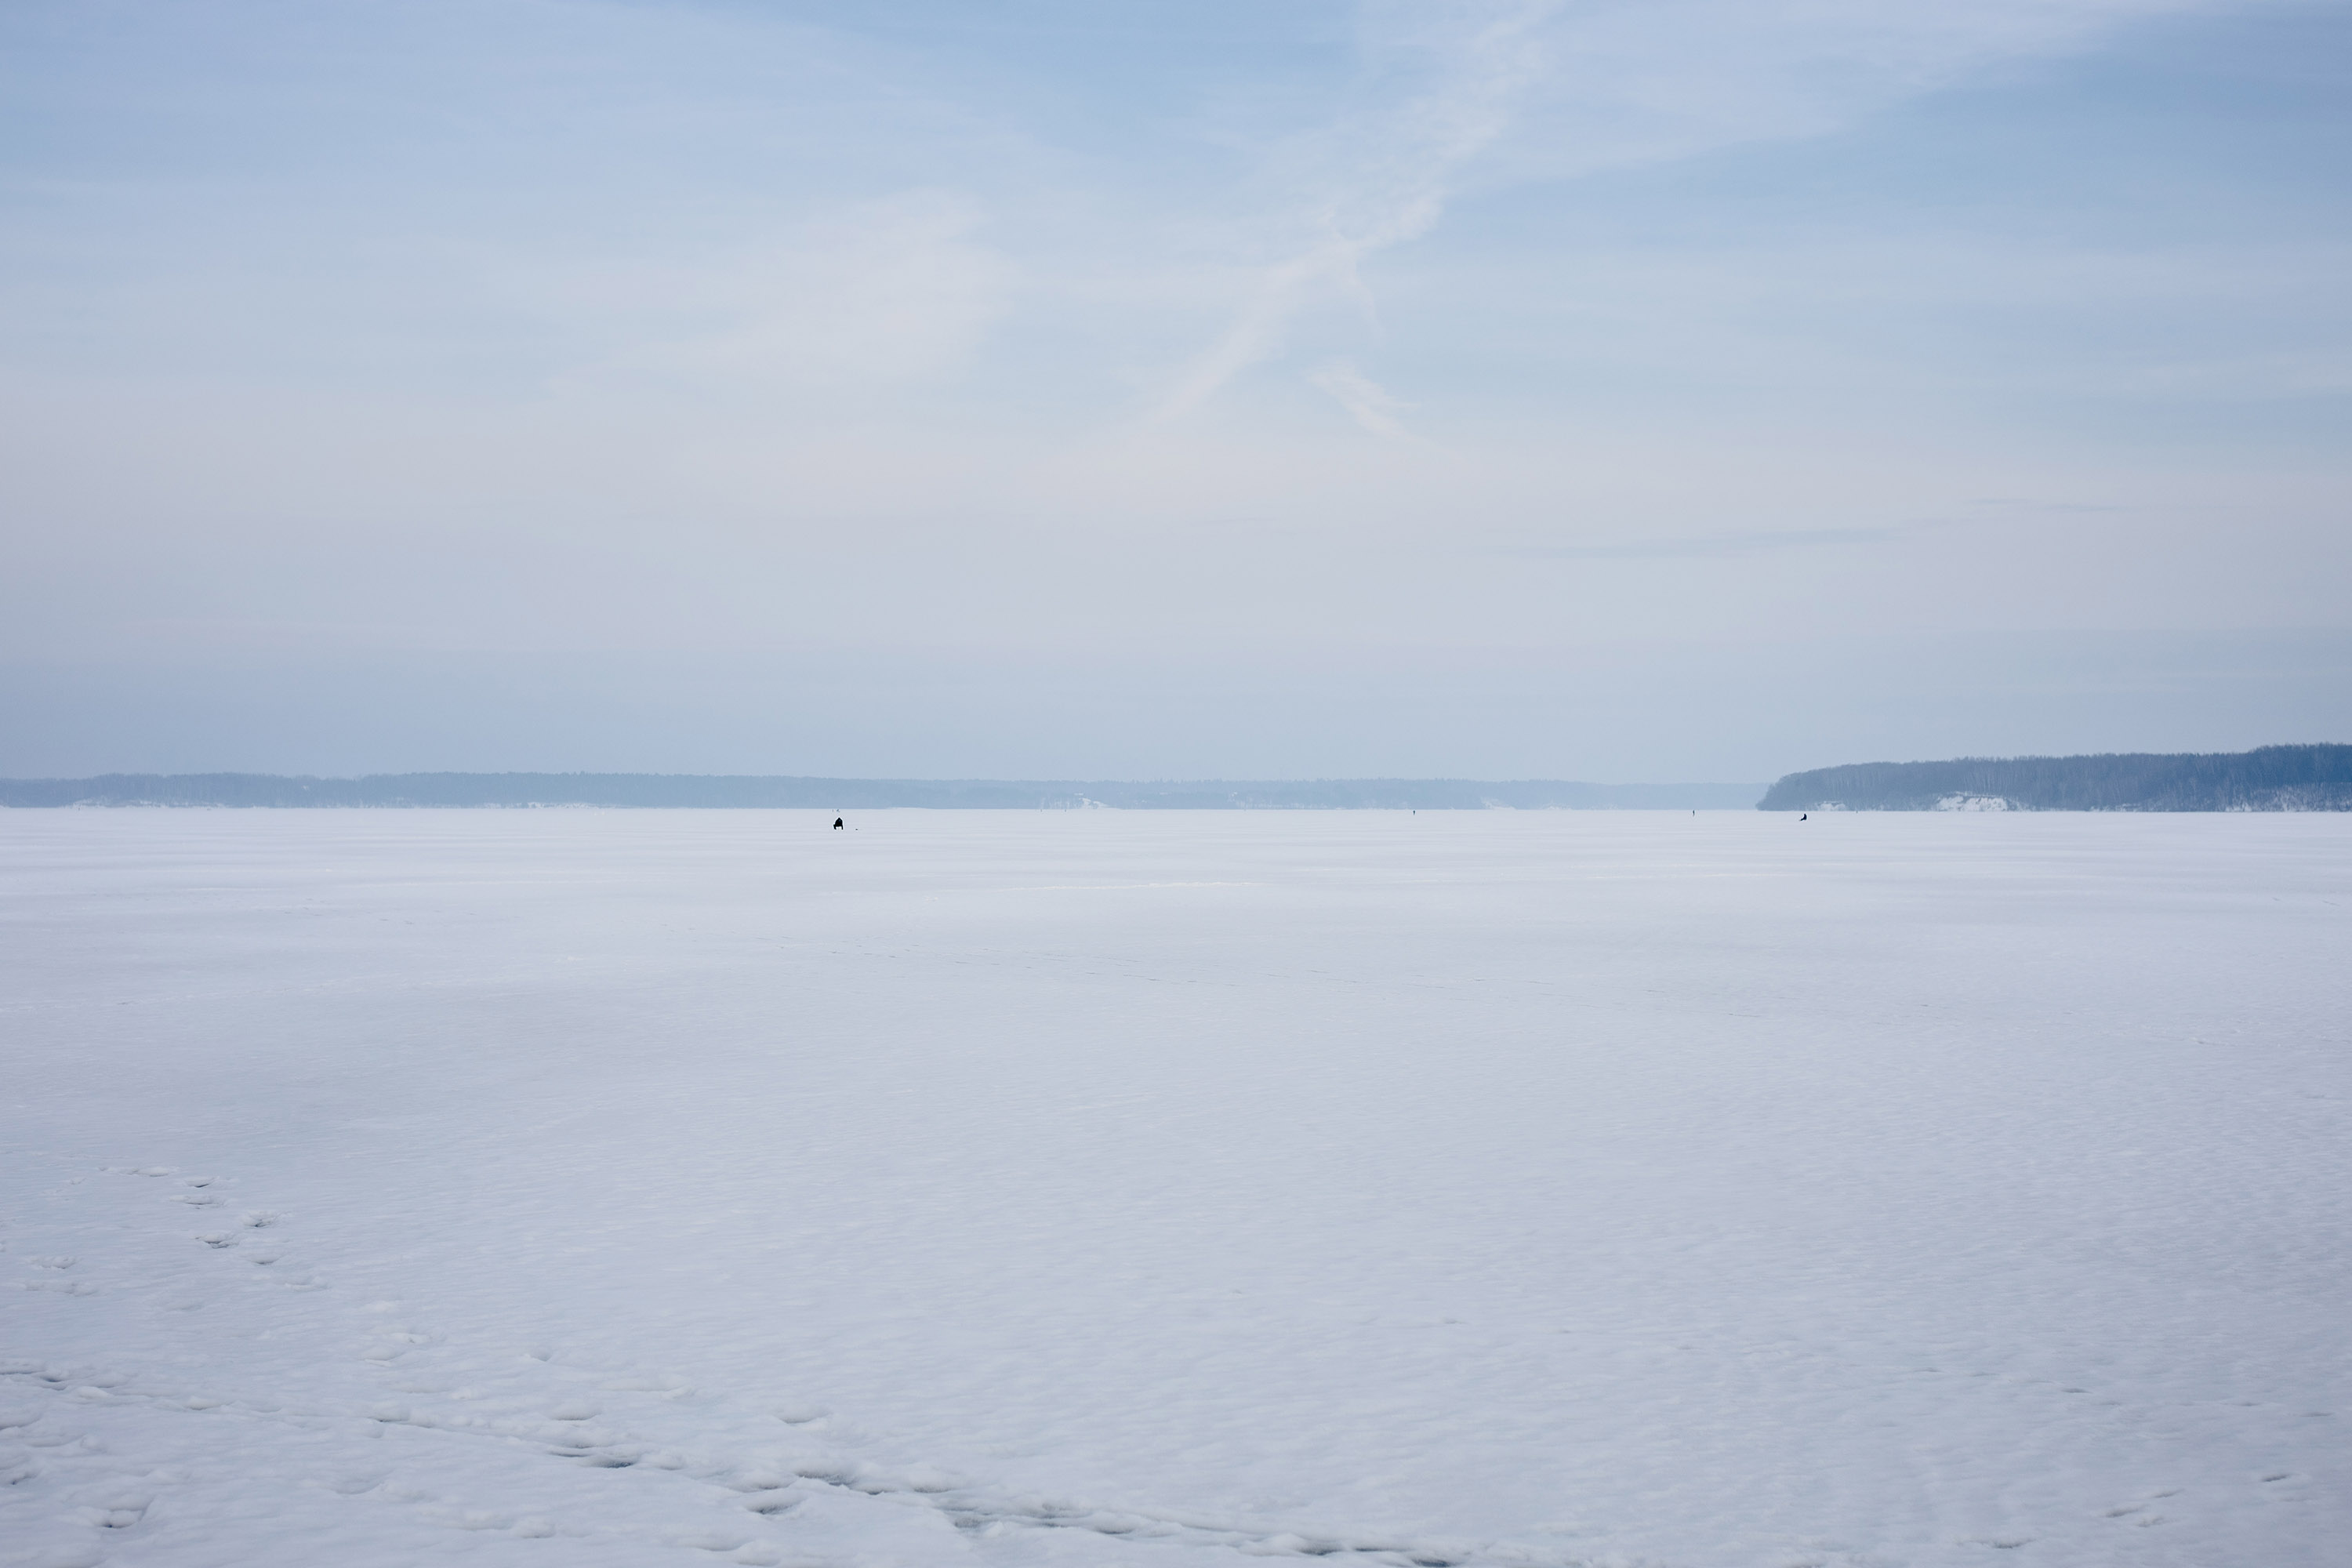 Lonely fisherman in the snow desert - Carl Zeiss Contarex 50mm f2